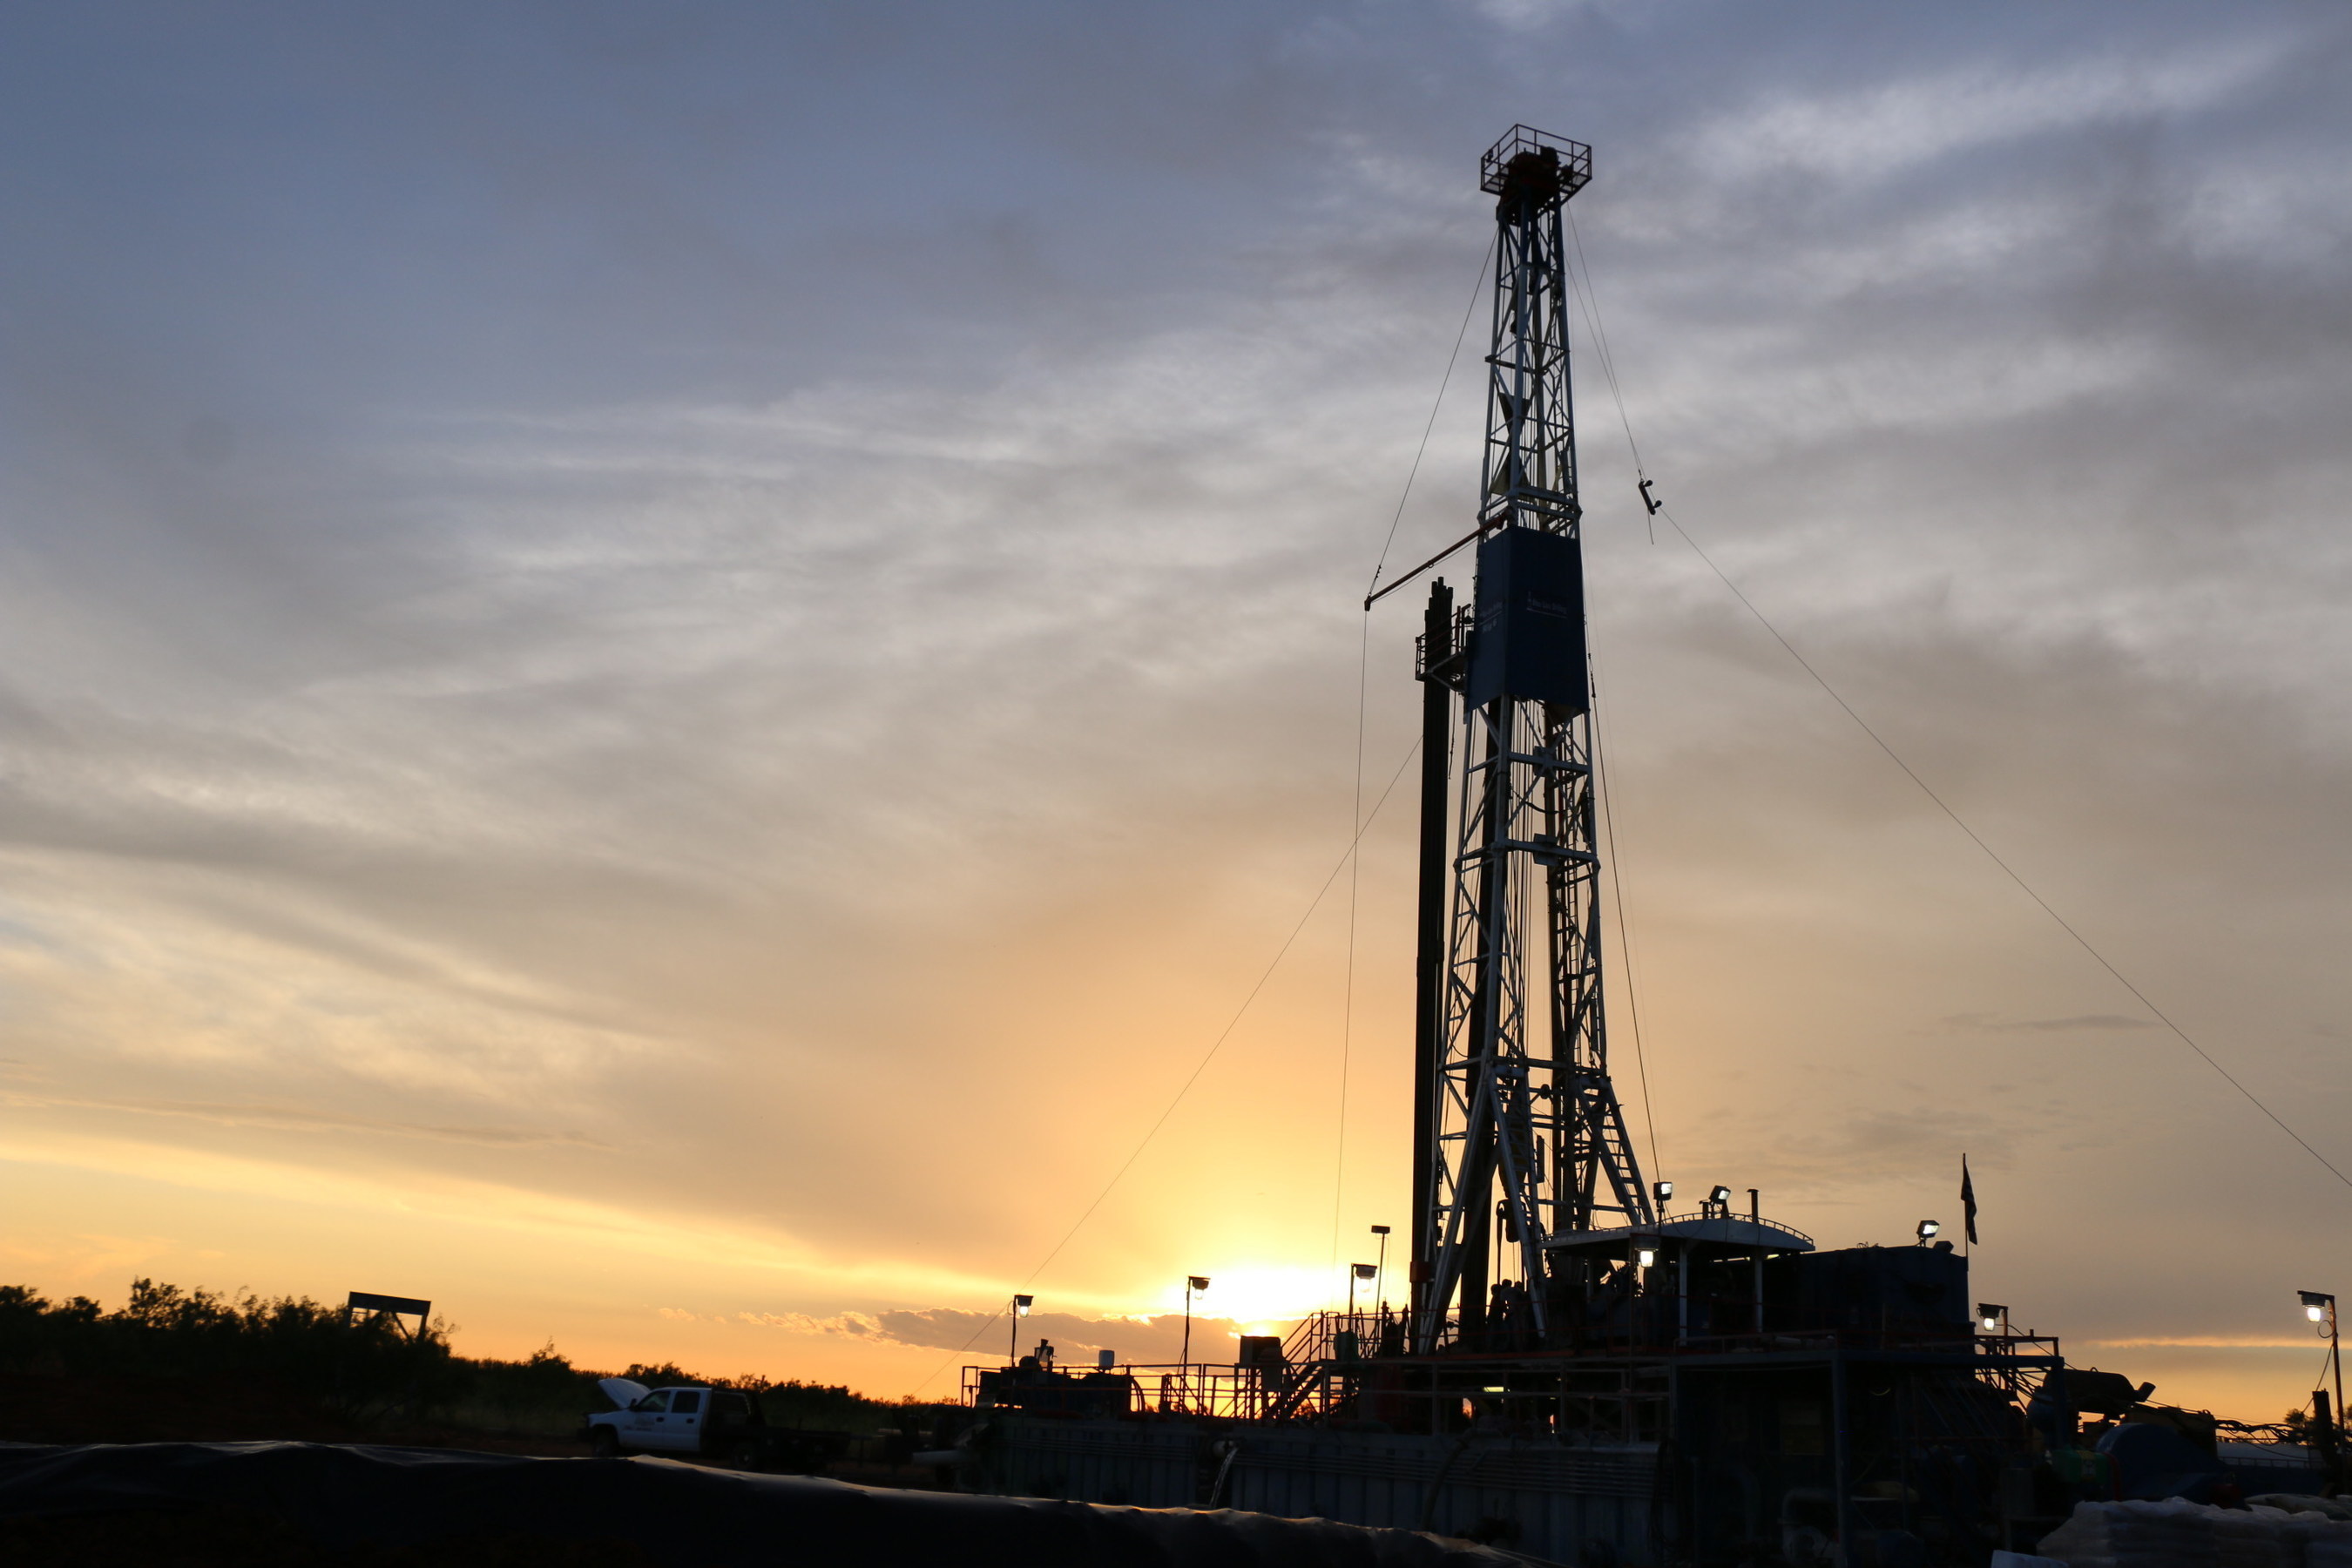 Patriot Energy's 'Barker's Trust #1' well drilling in the Permian Basin in West Texas